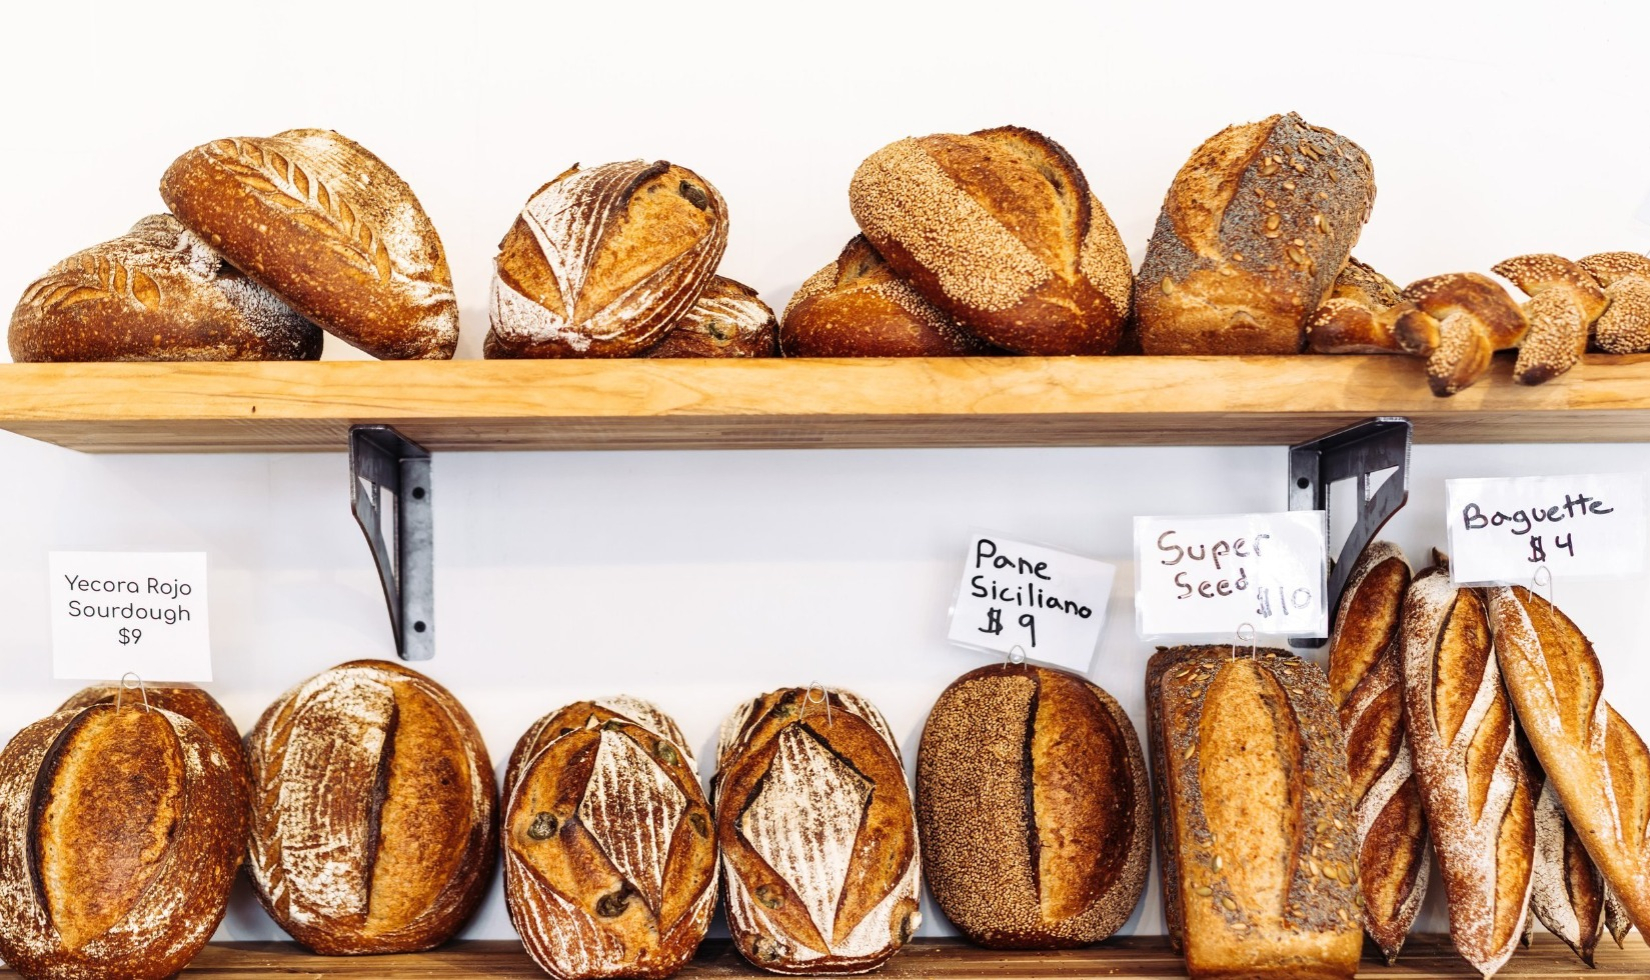 Shelves with fresh loaves of artisanal breads